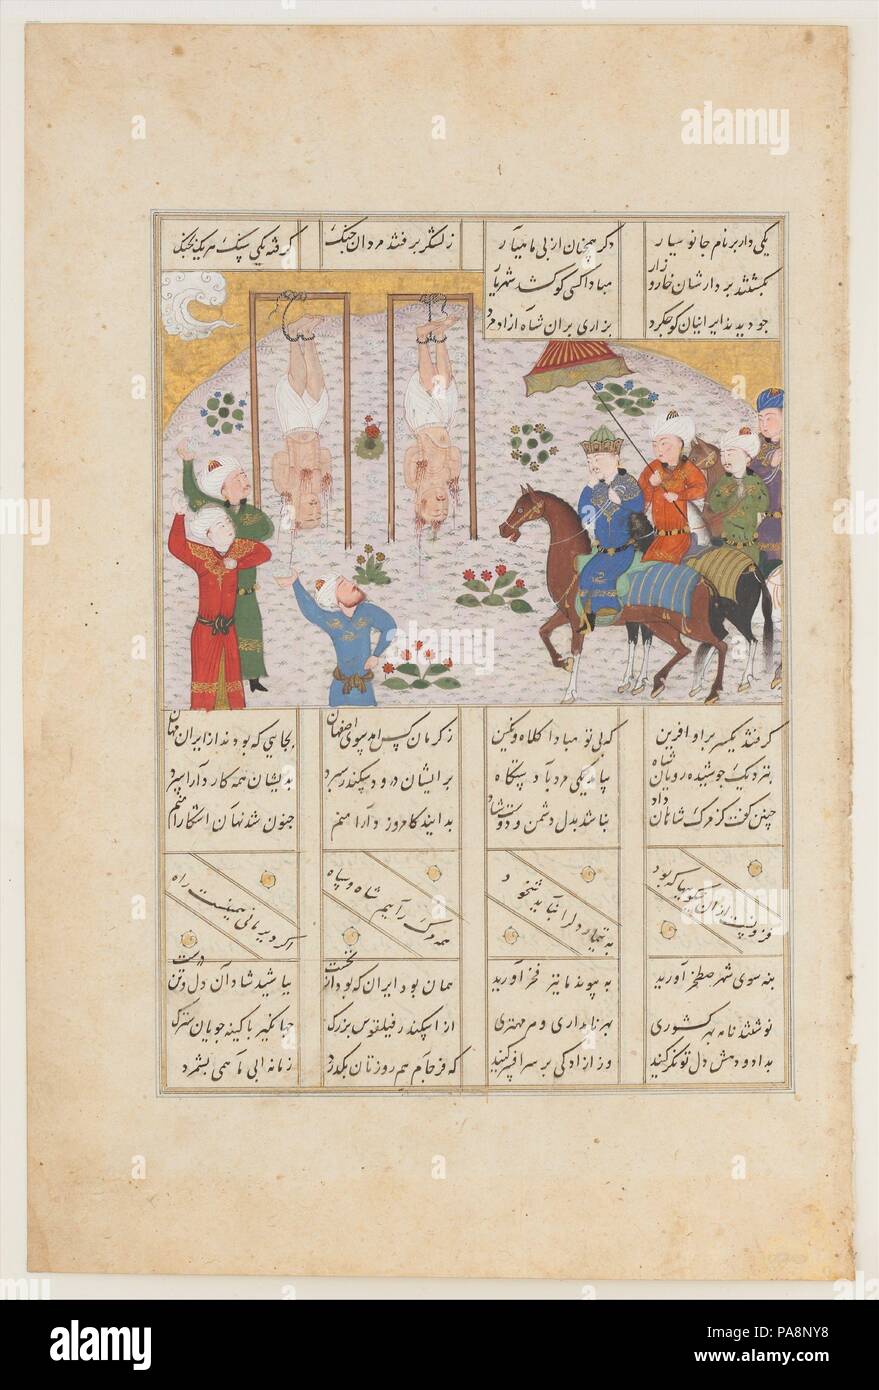 'Alexander Executes Janusiyar and Mahiyar, the Slayers of Darius', Folio from a Shahnama (Book of Kings) of Firdausi. Author: Abu'l Qasim Firdausi (935-1020). Dimensions: 8 3/4 x 5 3/8in. (22.2 x 13.6cm). Date: dated A.H. 887/A.D. 1482.  Alexander the Great figures prominently in Persian literature and histories, including in the Shahnama, where he is described as the half-brother of the Persian king Darab, who is sometimes considered to be the historical figure Darius.  Alexander and Darius go to war, and Darius's attendants decide to kill him and pledge their allegiance to Alexander.  When A Stock Photo